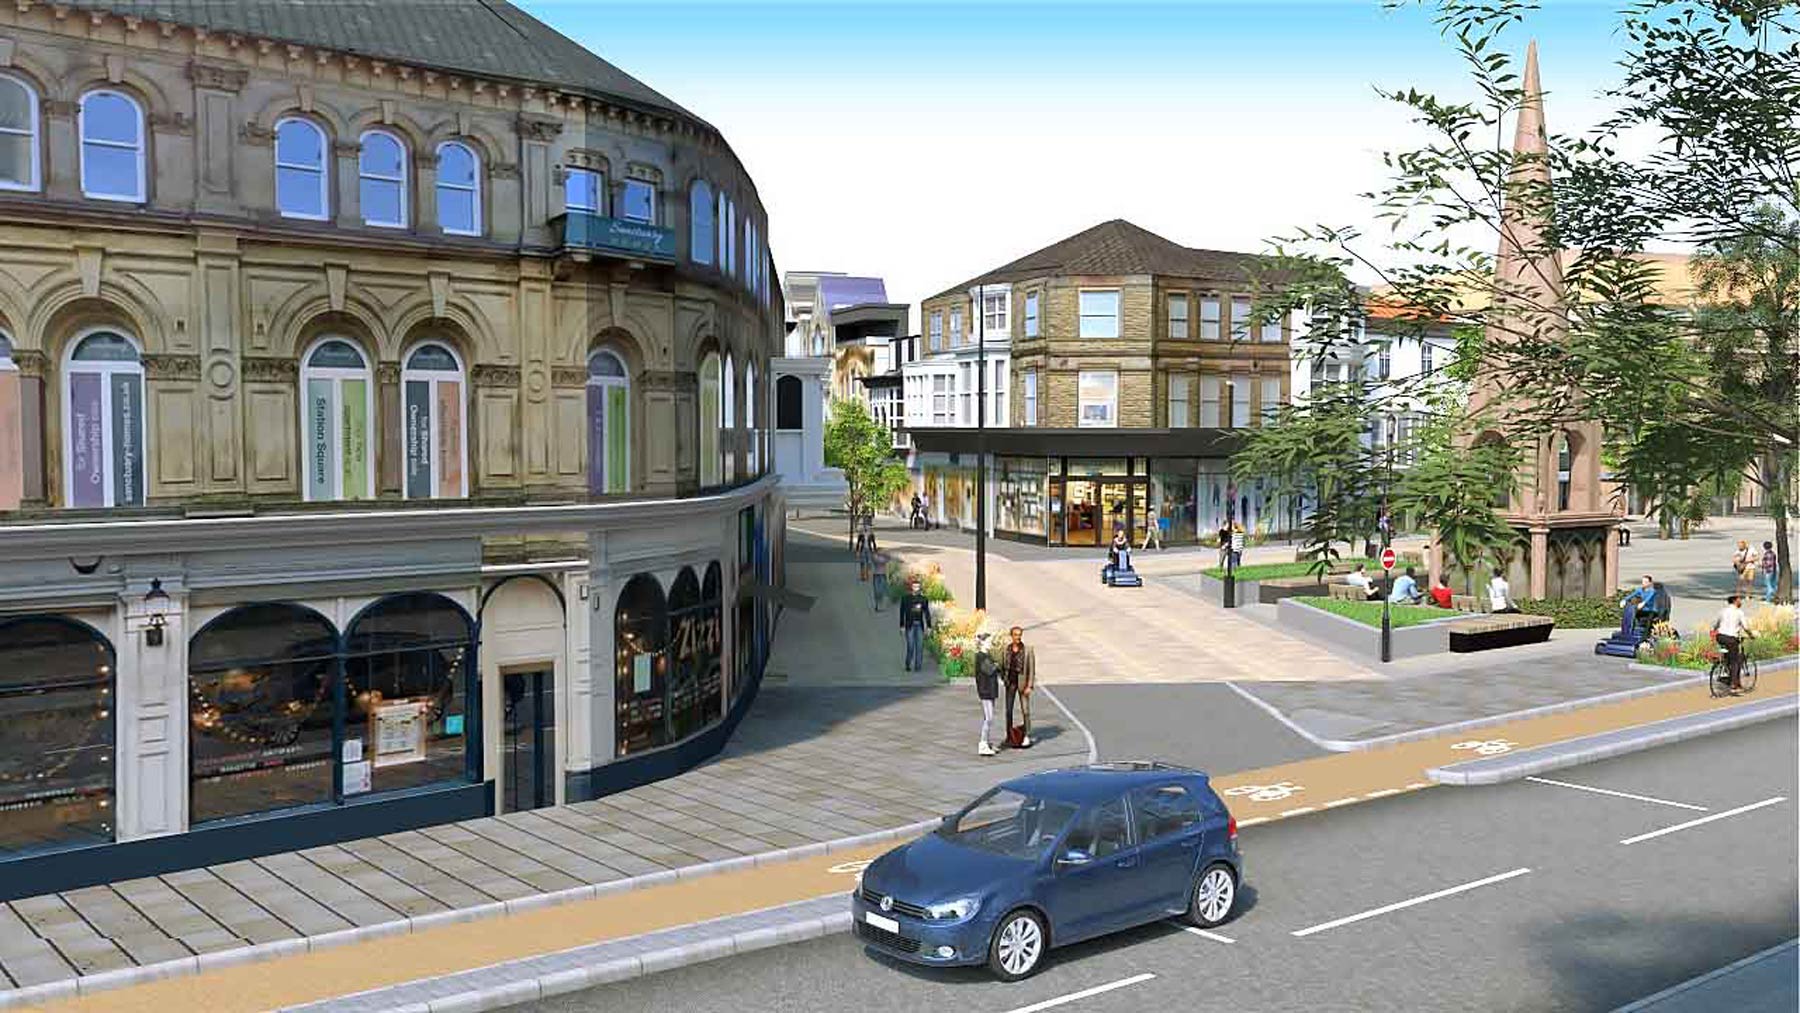 Artists’ impressions of aspects of the revised designs for each of Harrogate